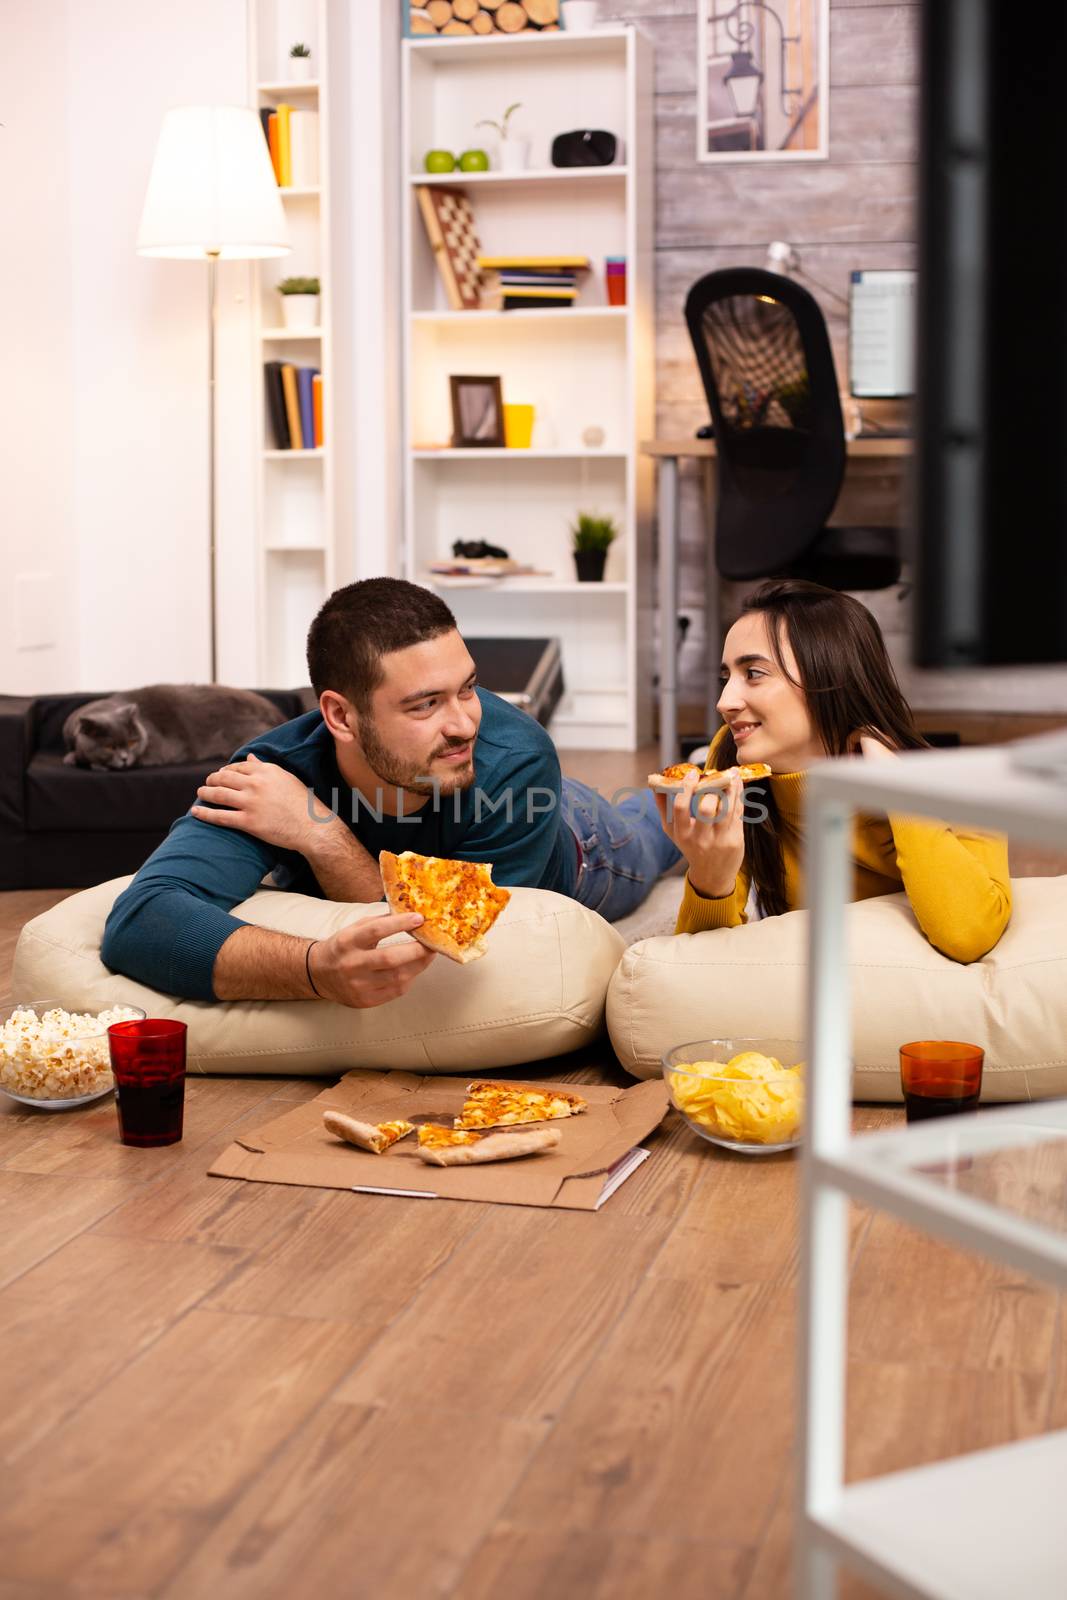 Couple sitting on the floor and watching TV in their living room by DCStudio